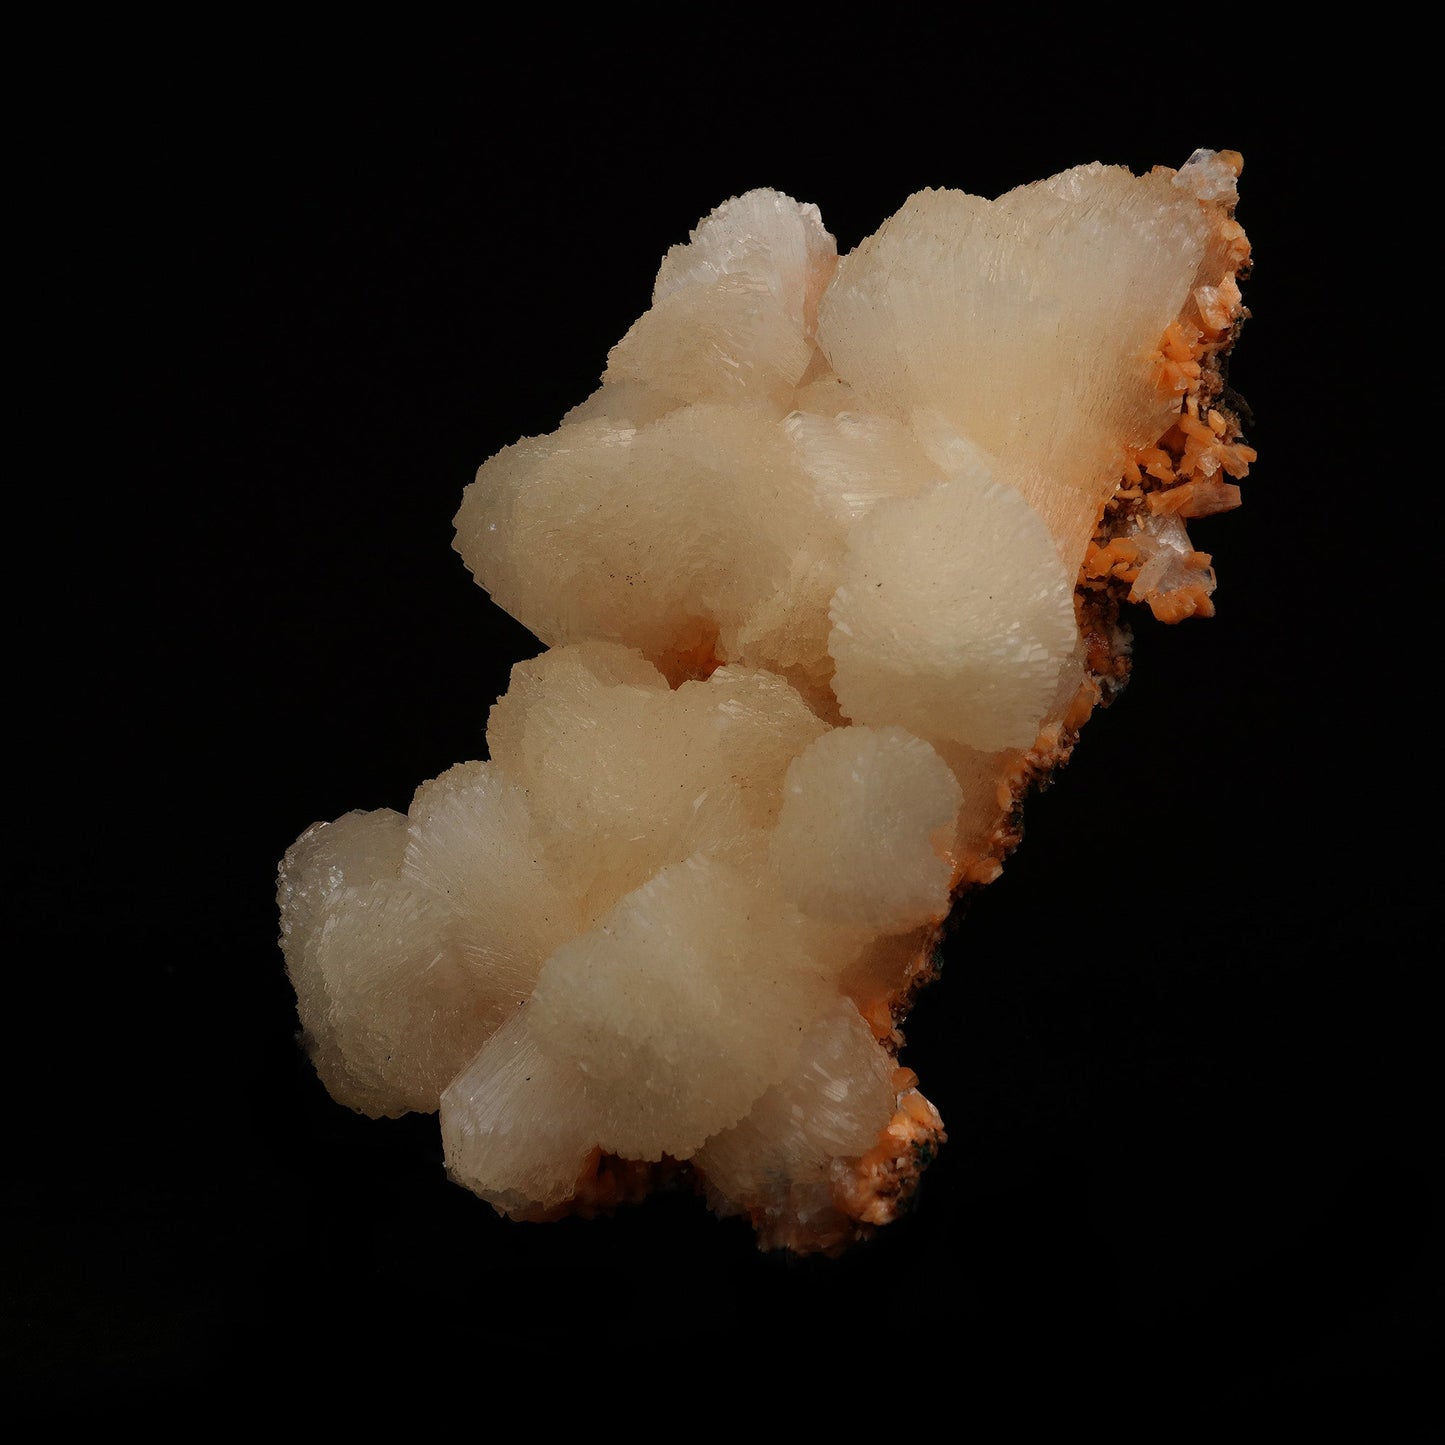 Stilbite Lusterous Cluster Natural Mineral Specimen # B 5204  https://www.superbminerals.us/products/stilbite-lusterous-cluster-natural-mineral-specimen-b-5204  Features: Featuring many excellent quality bladed groups of Stilbite in a soft white hue, resting over pearly stalactitic formations of peach colored Heulandite, this piece is a stunning example of the material. The sculpture is really flashy and three-dimensional, and I particularly like how the Stilbites